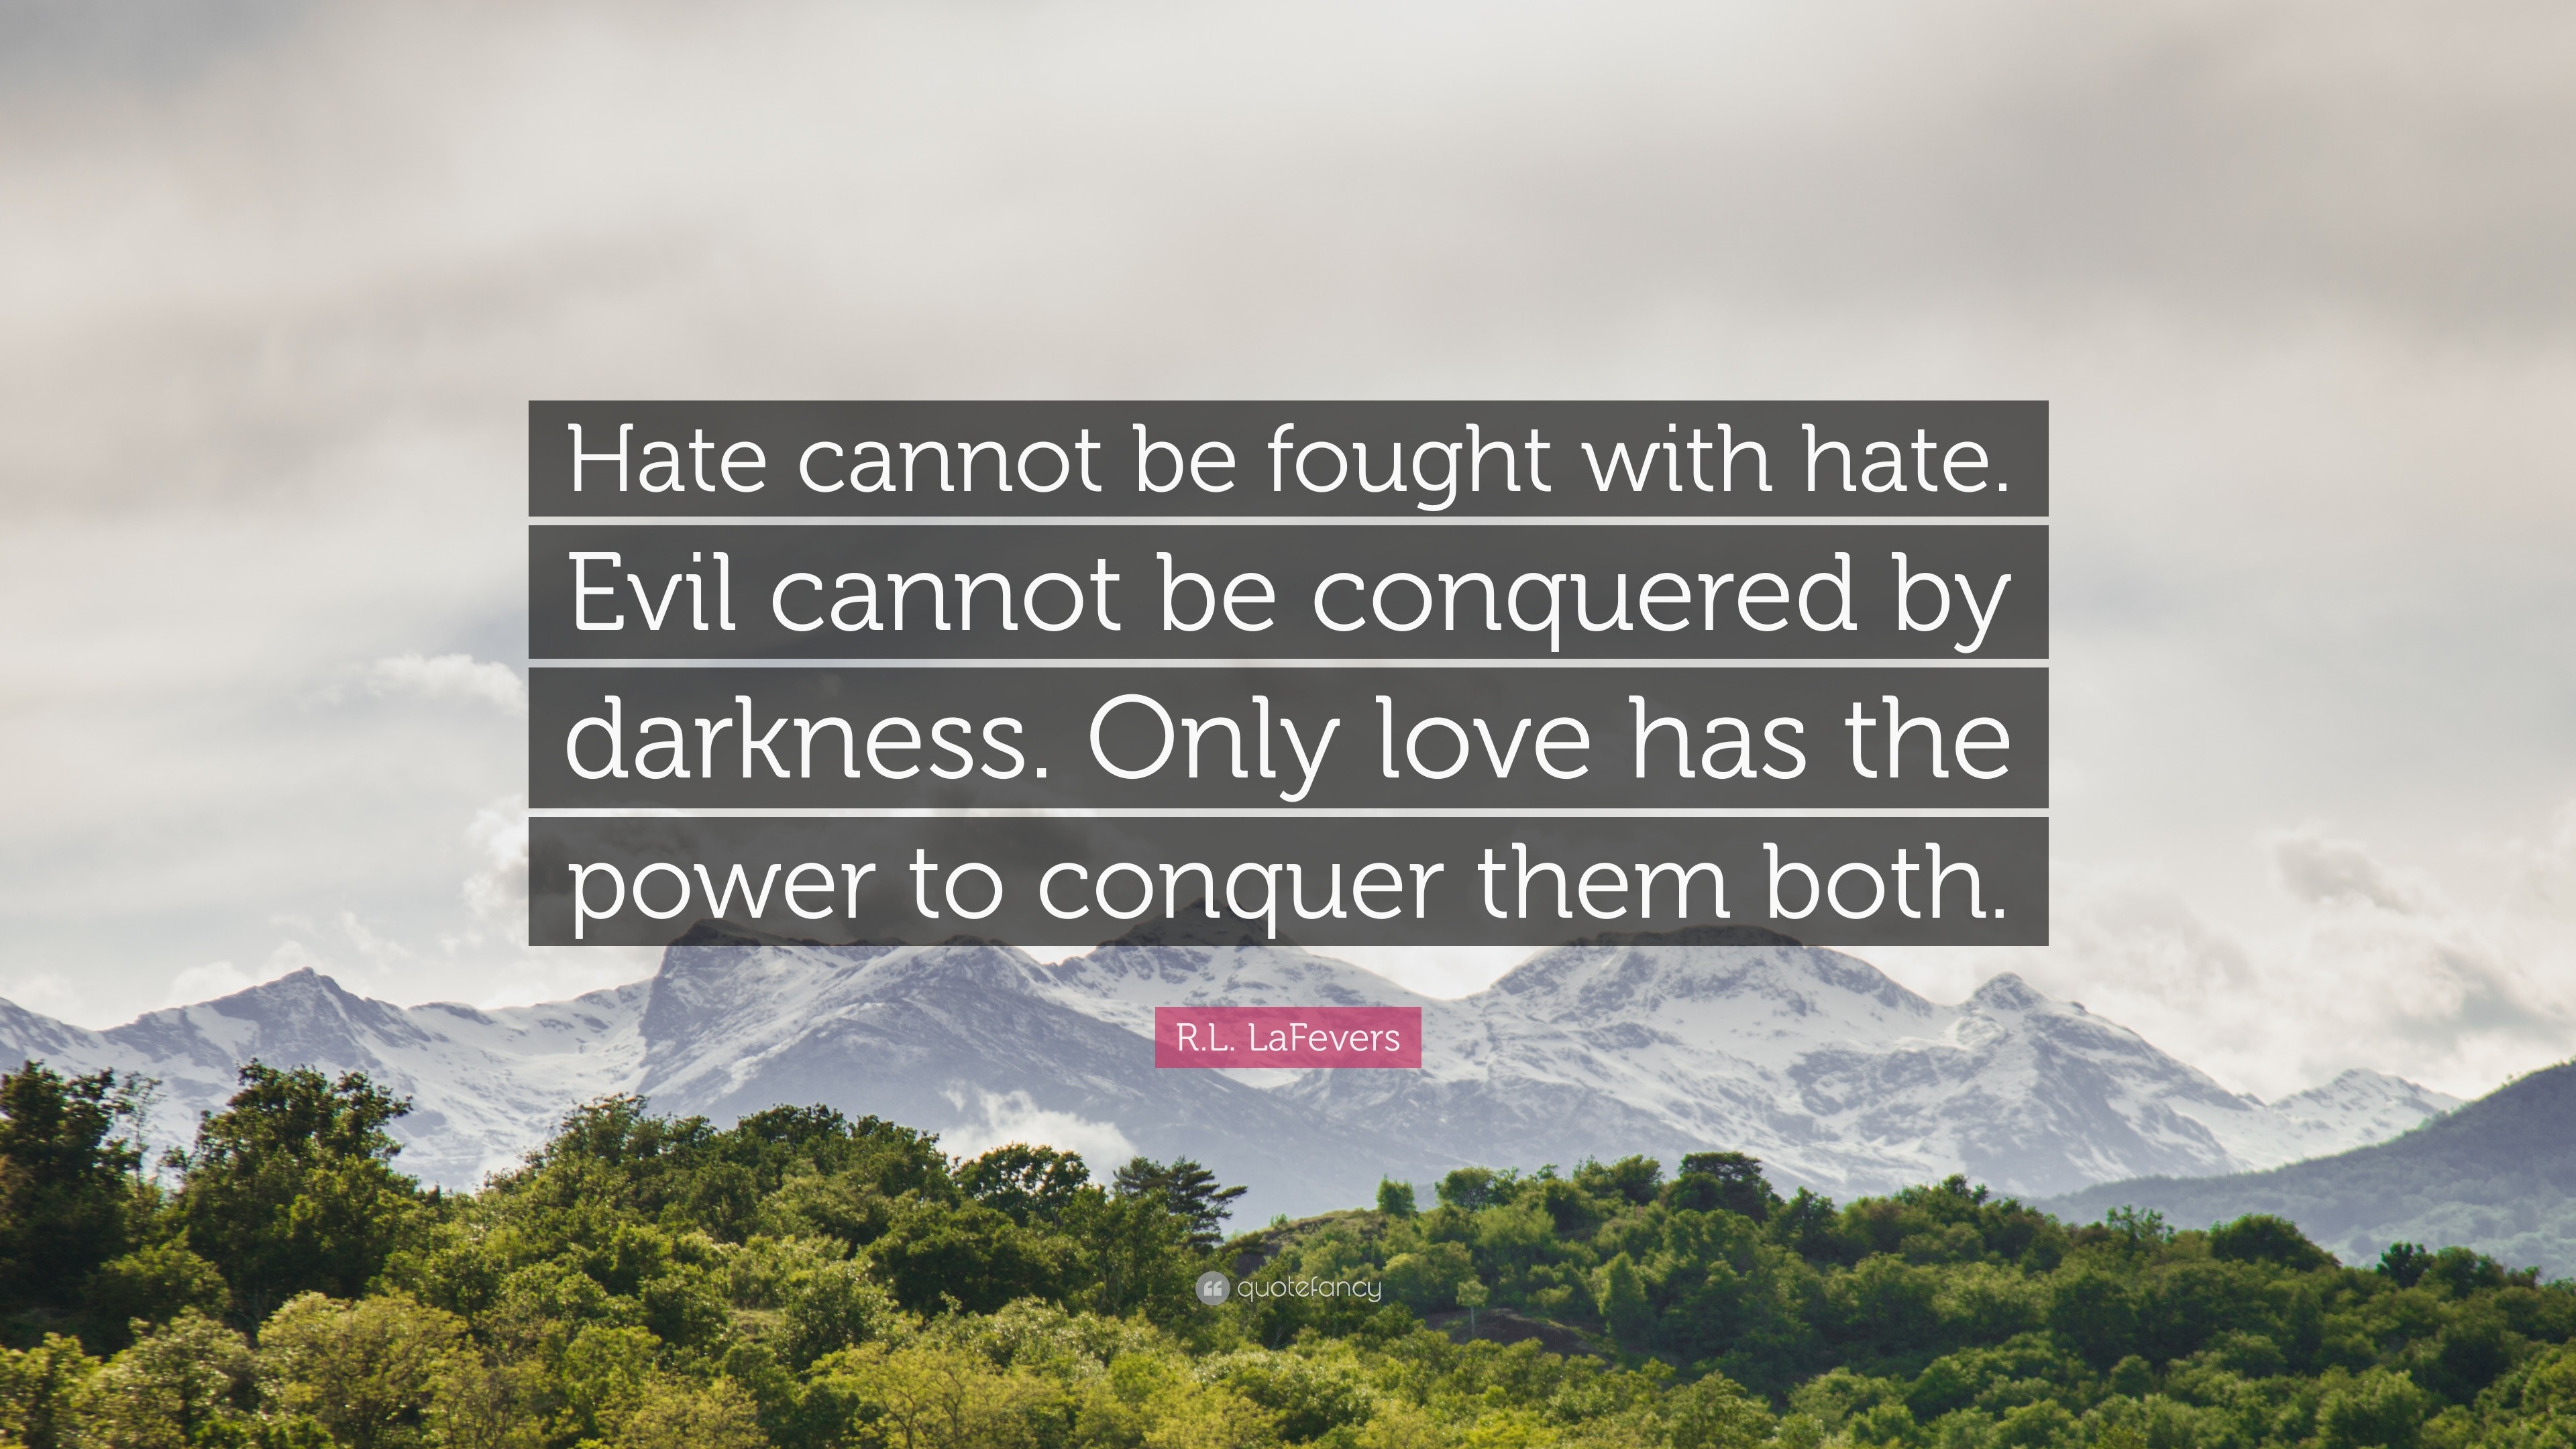 R L LaFevers Quote “Hate cannot be fought with hate Evil cannot be conquered